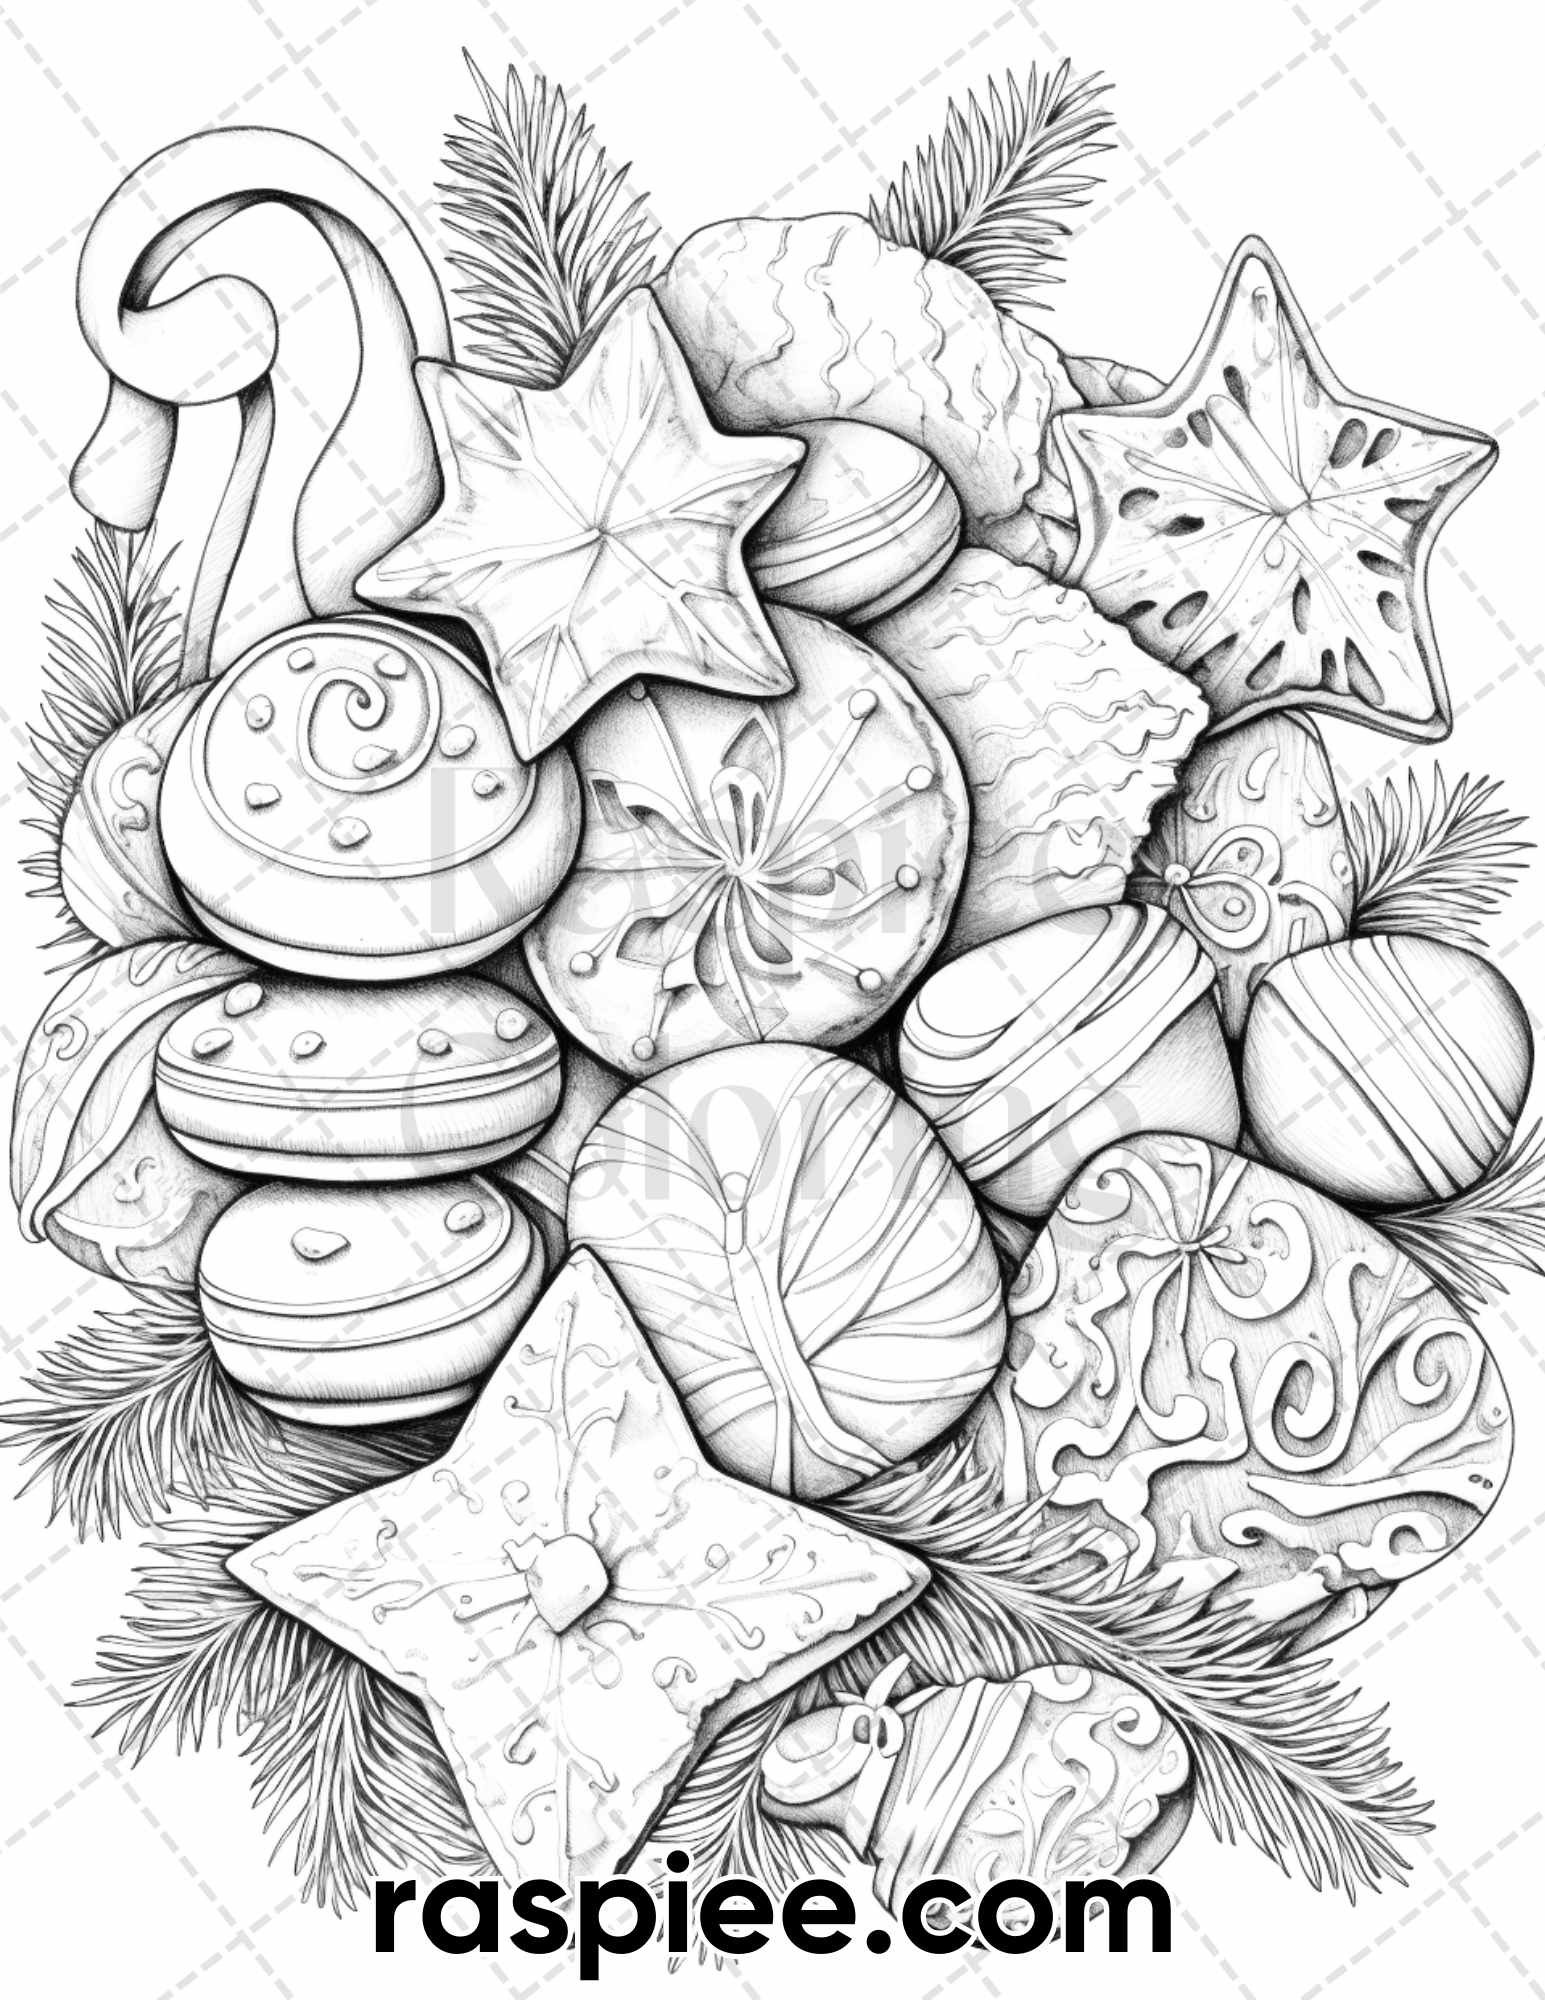 Relaxing christmas grayscale coloring pages for adults festive scenes â coloring